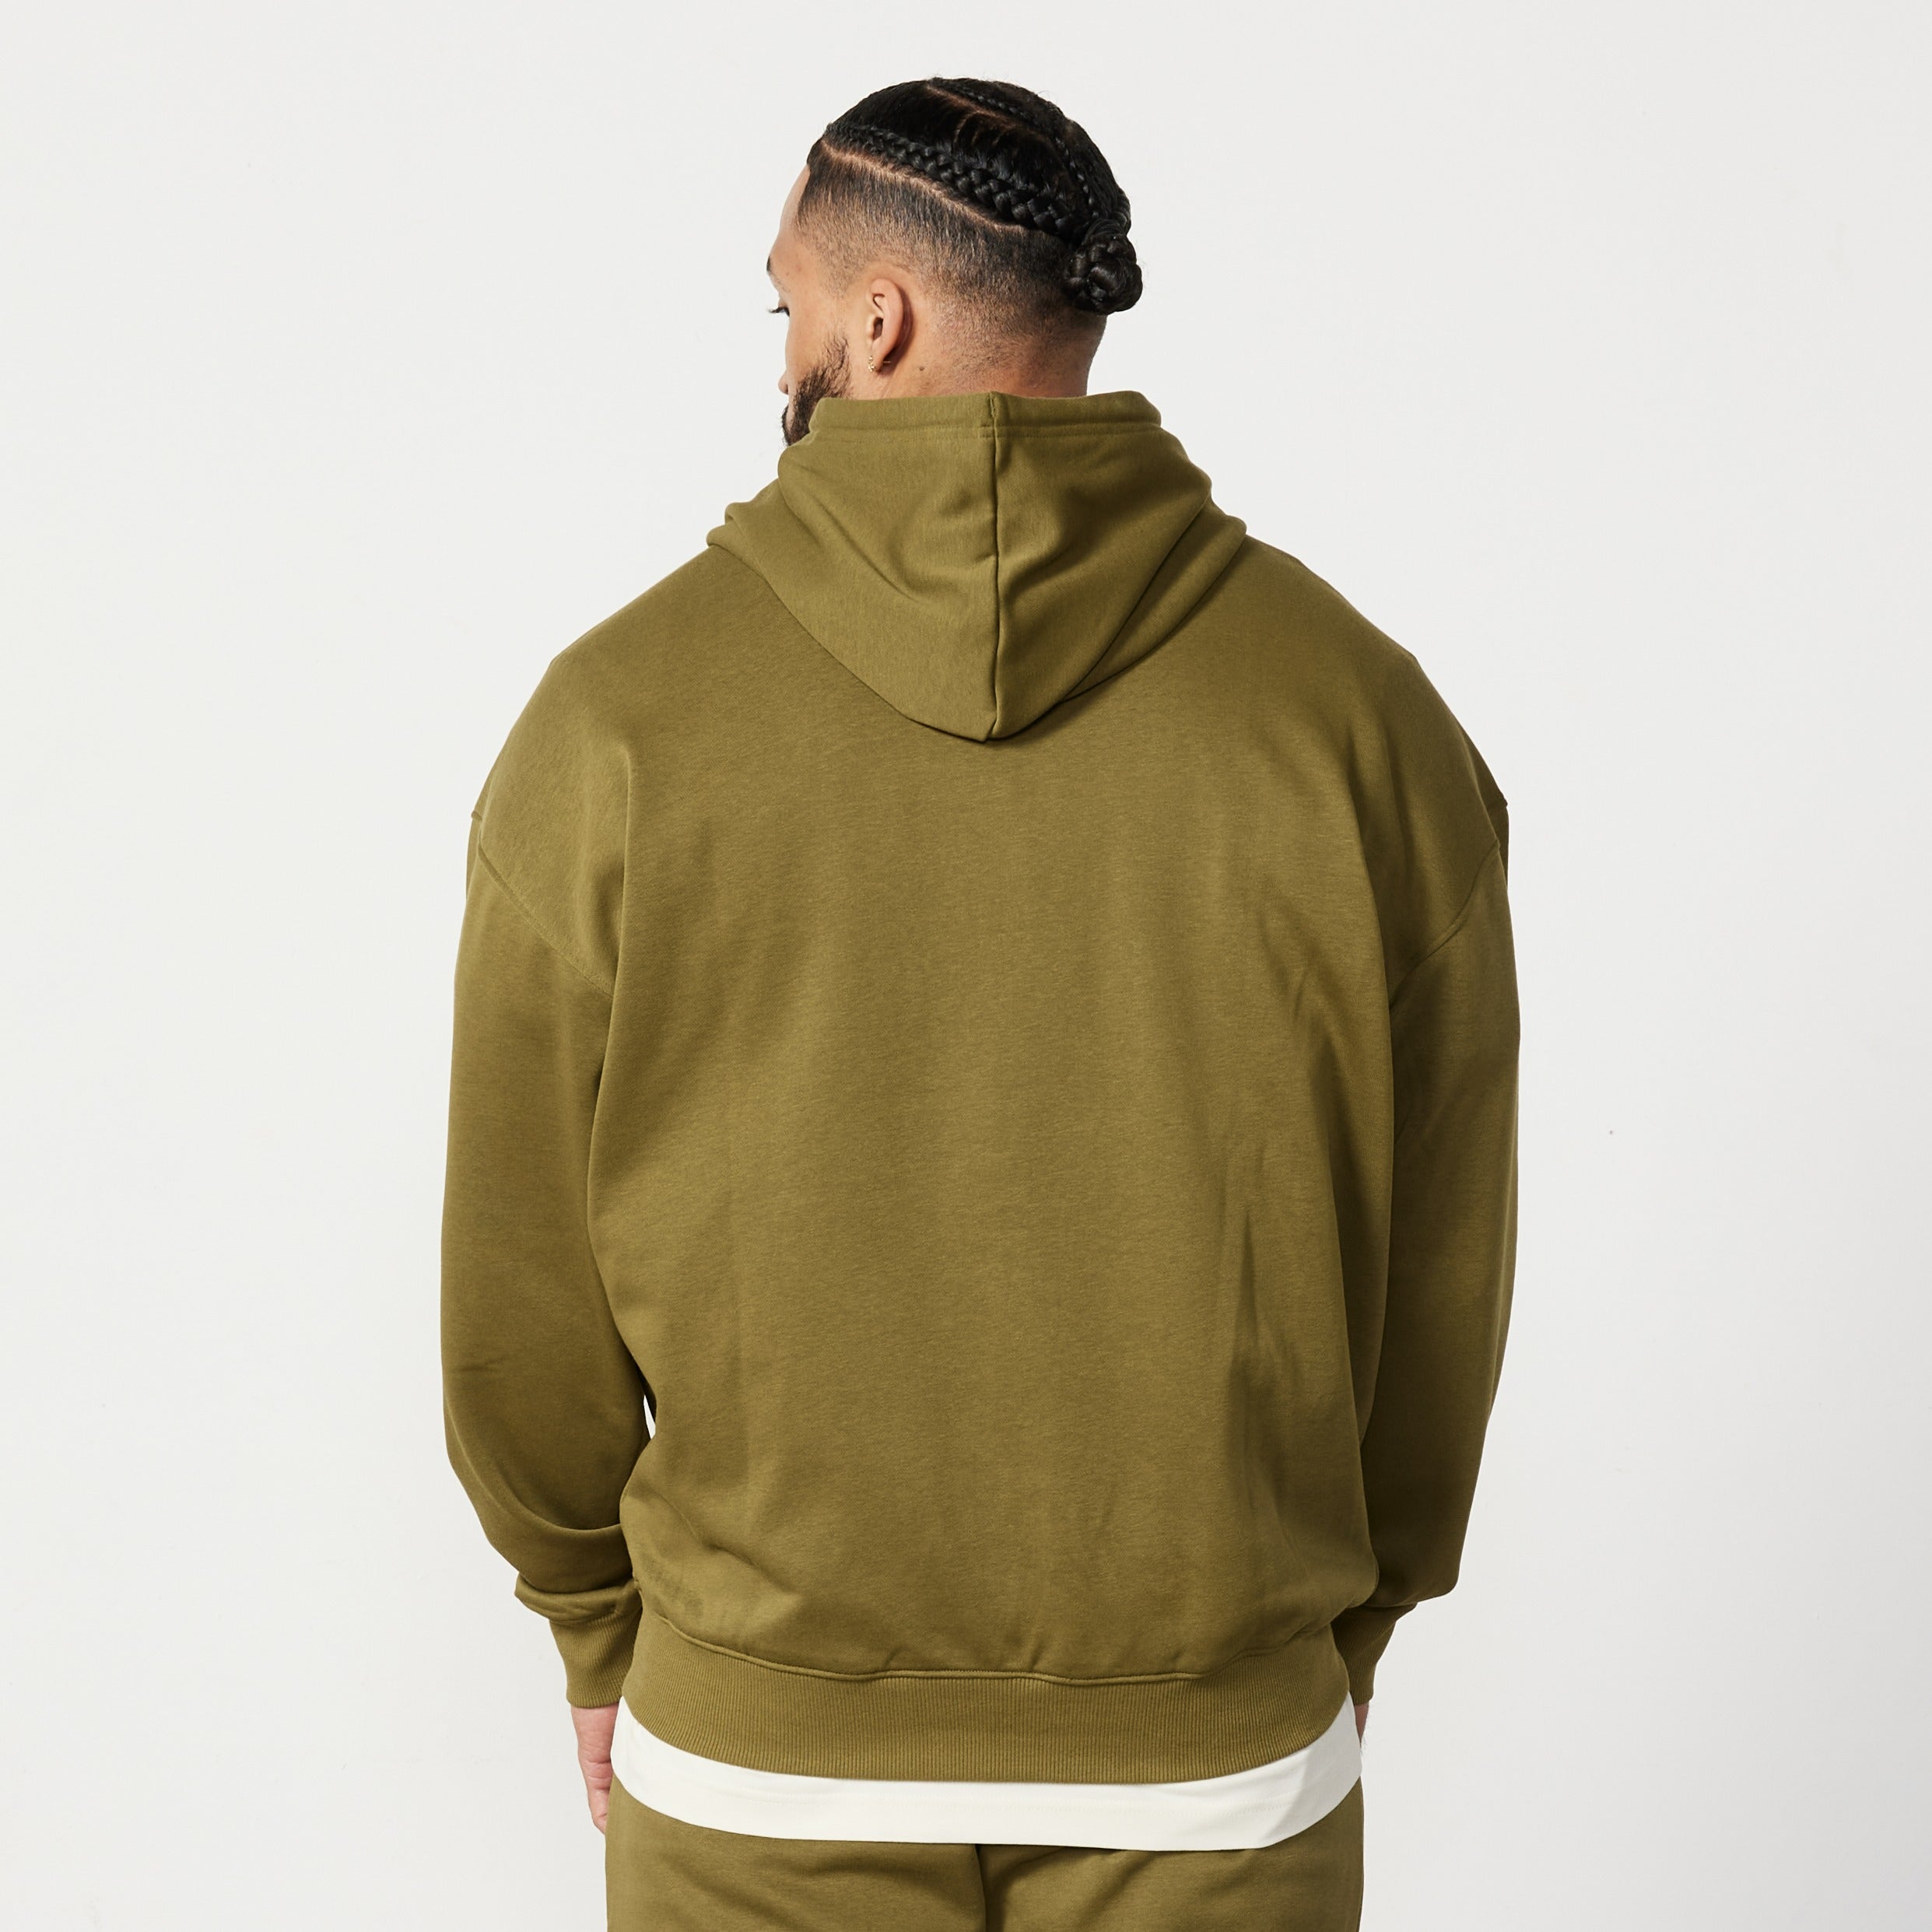 Vanquish Essential Olive Green Oversized Pullover Hoodie